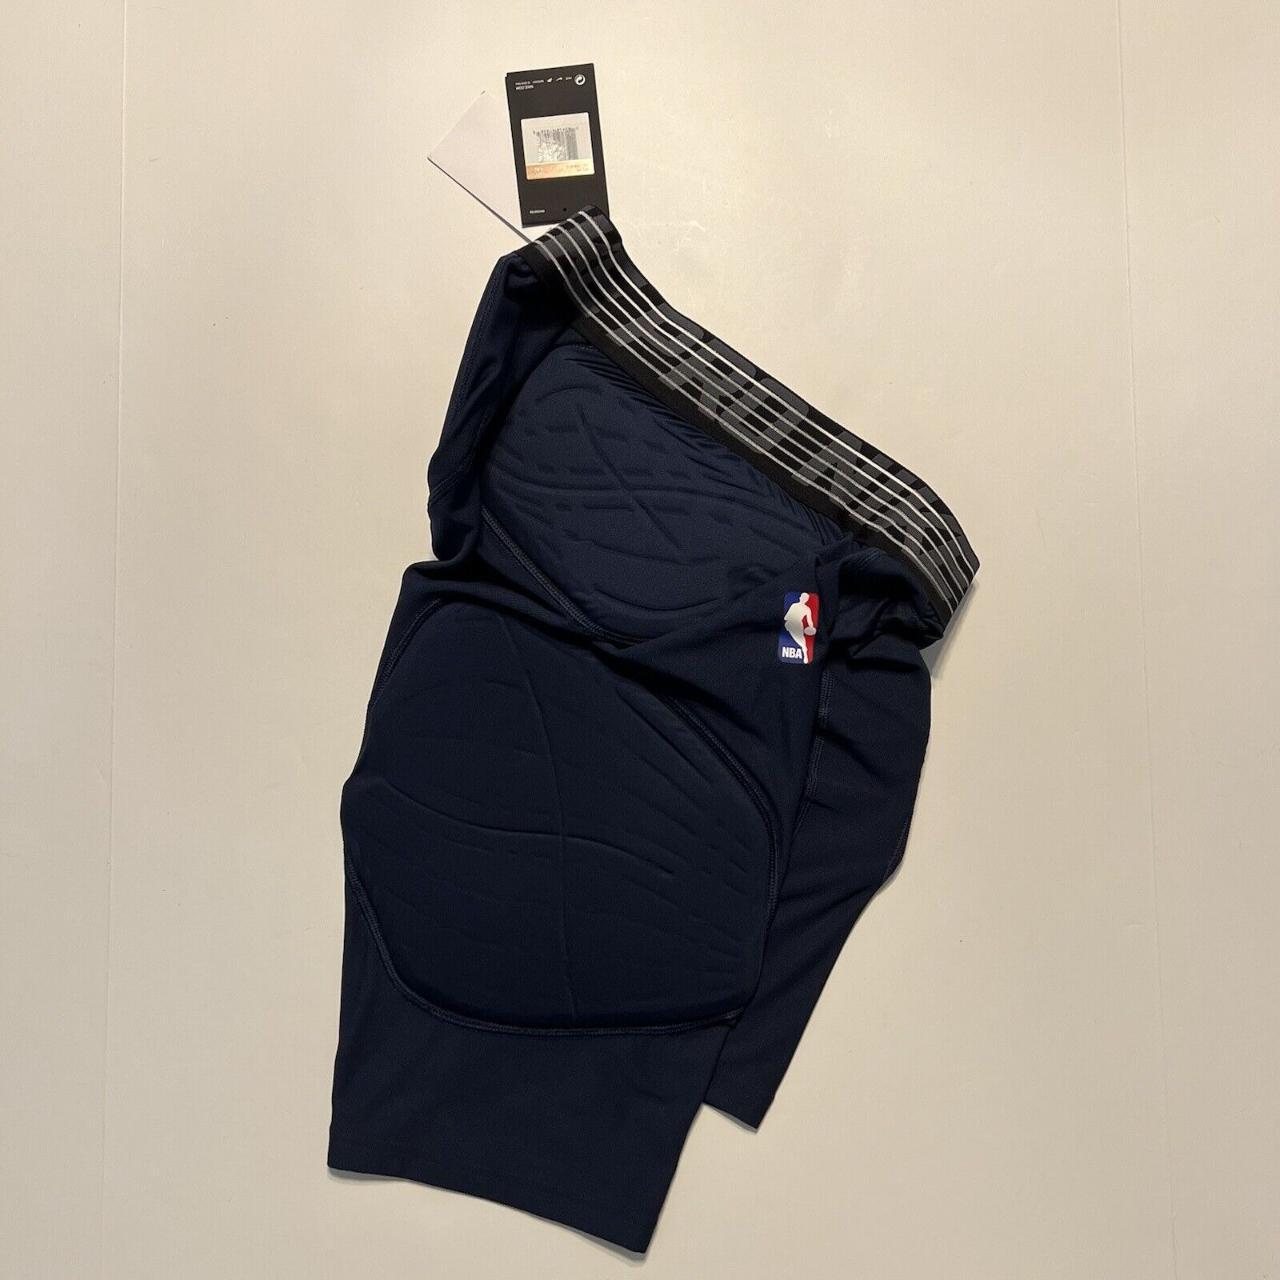 Nike Nba Padded Compression Shorts FOR SALE! - PicClick